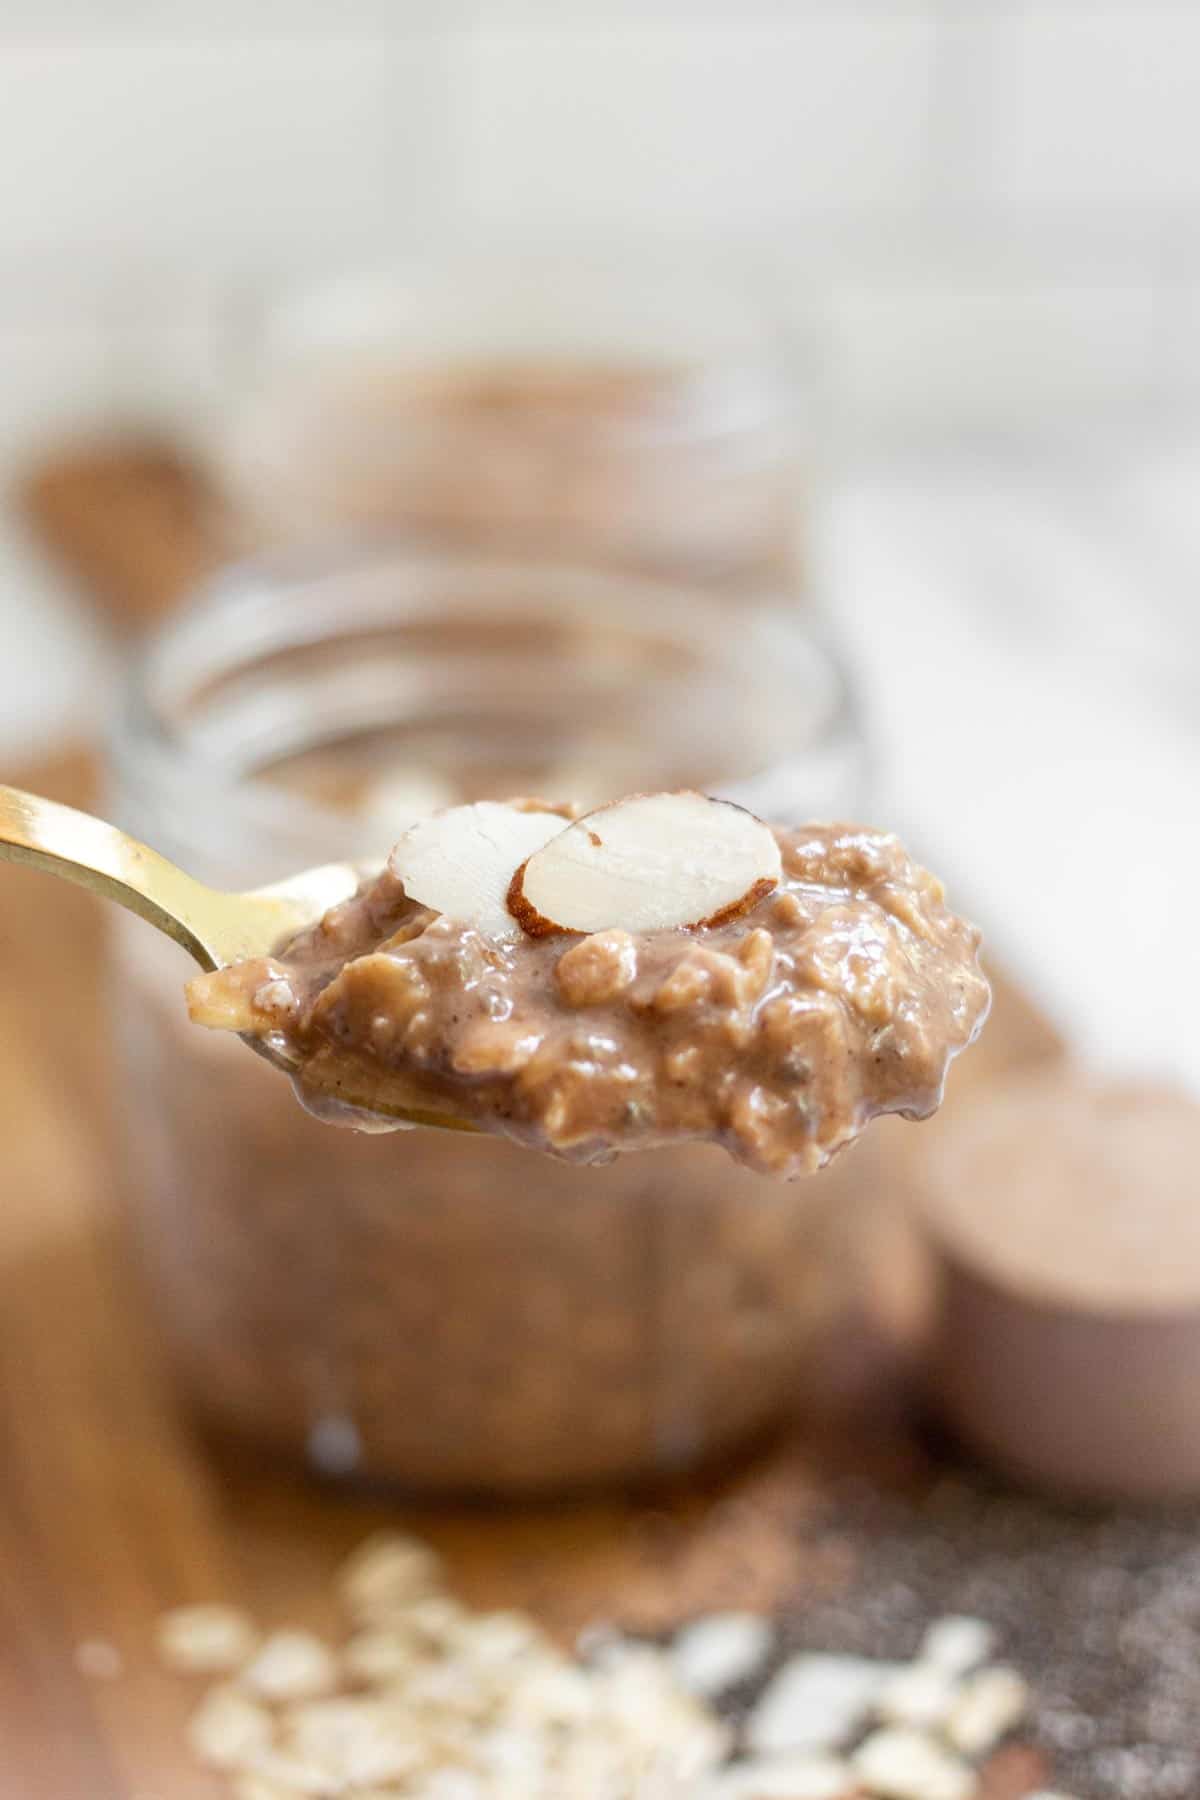 A spoonful of overnight oats with protein powder topped with almond slices.